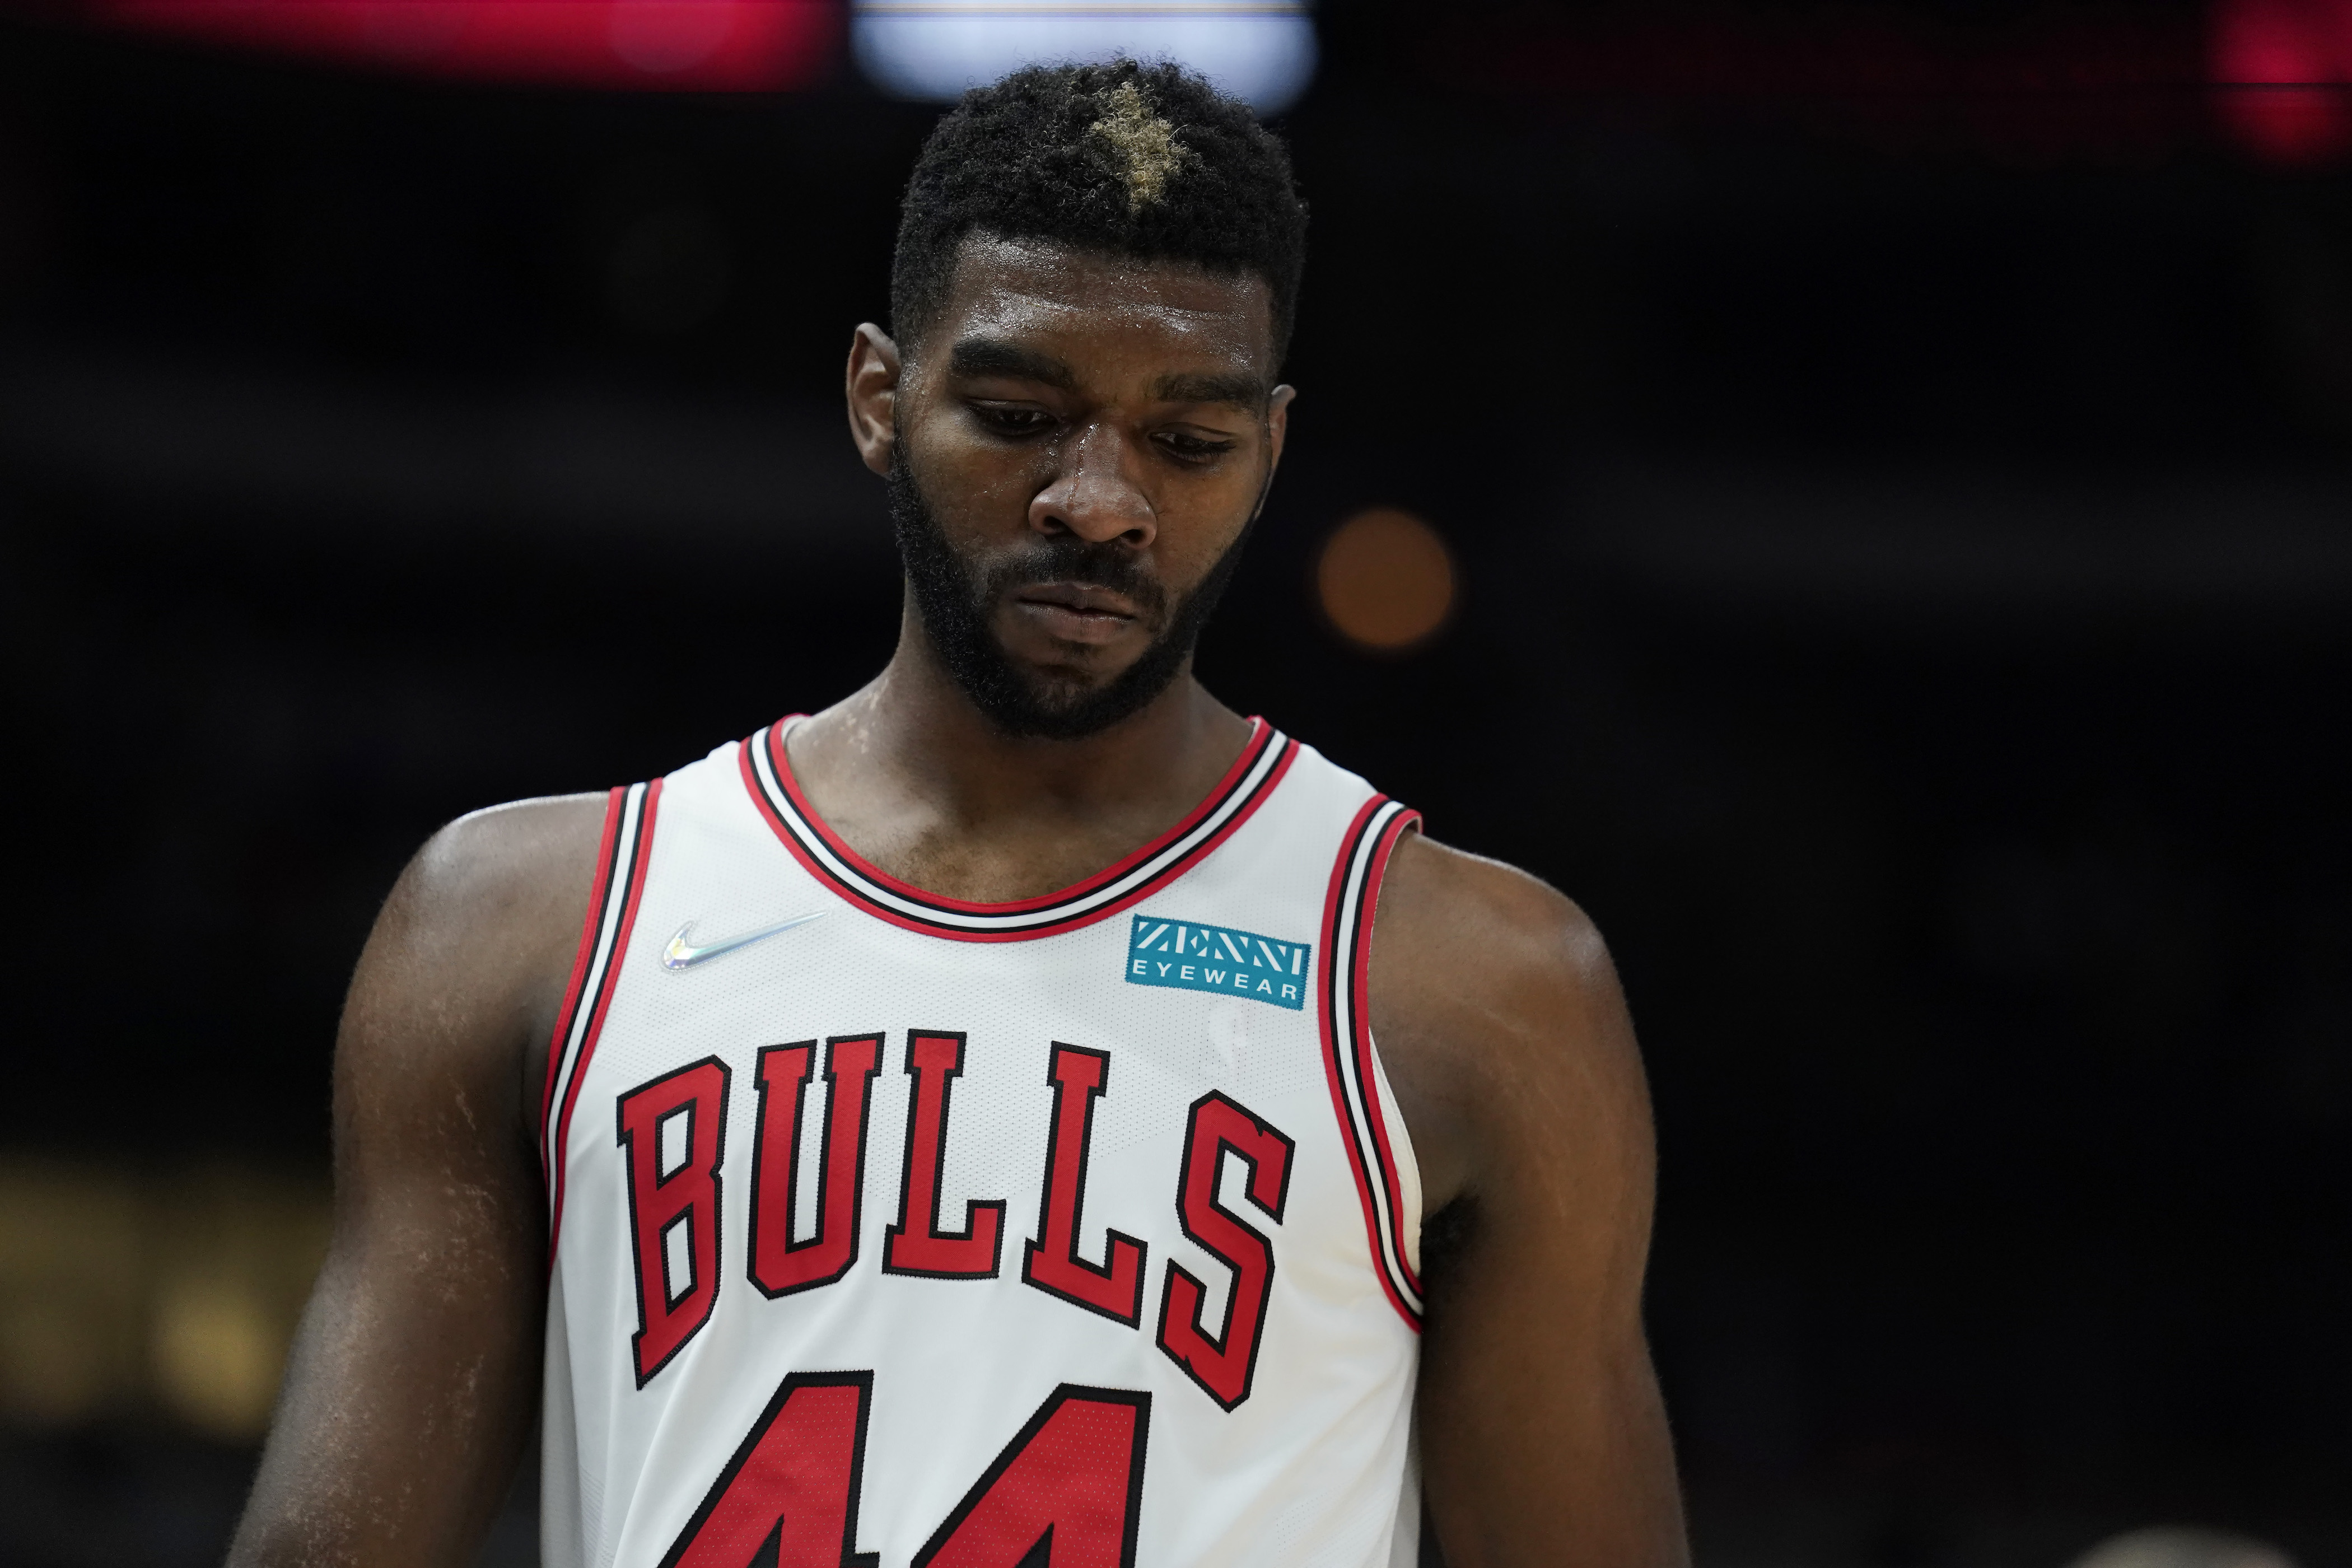 Chicago Bulls forward Patrick Williams looks on during an NBA game against the Memphis Grizzlies in October 2021